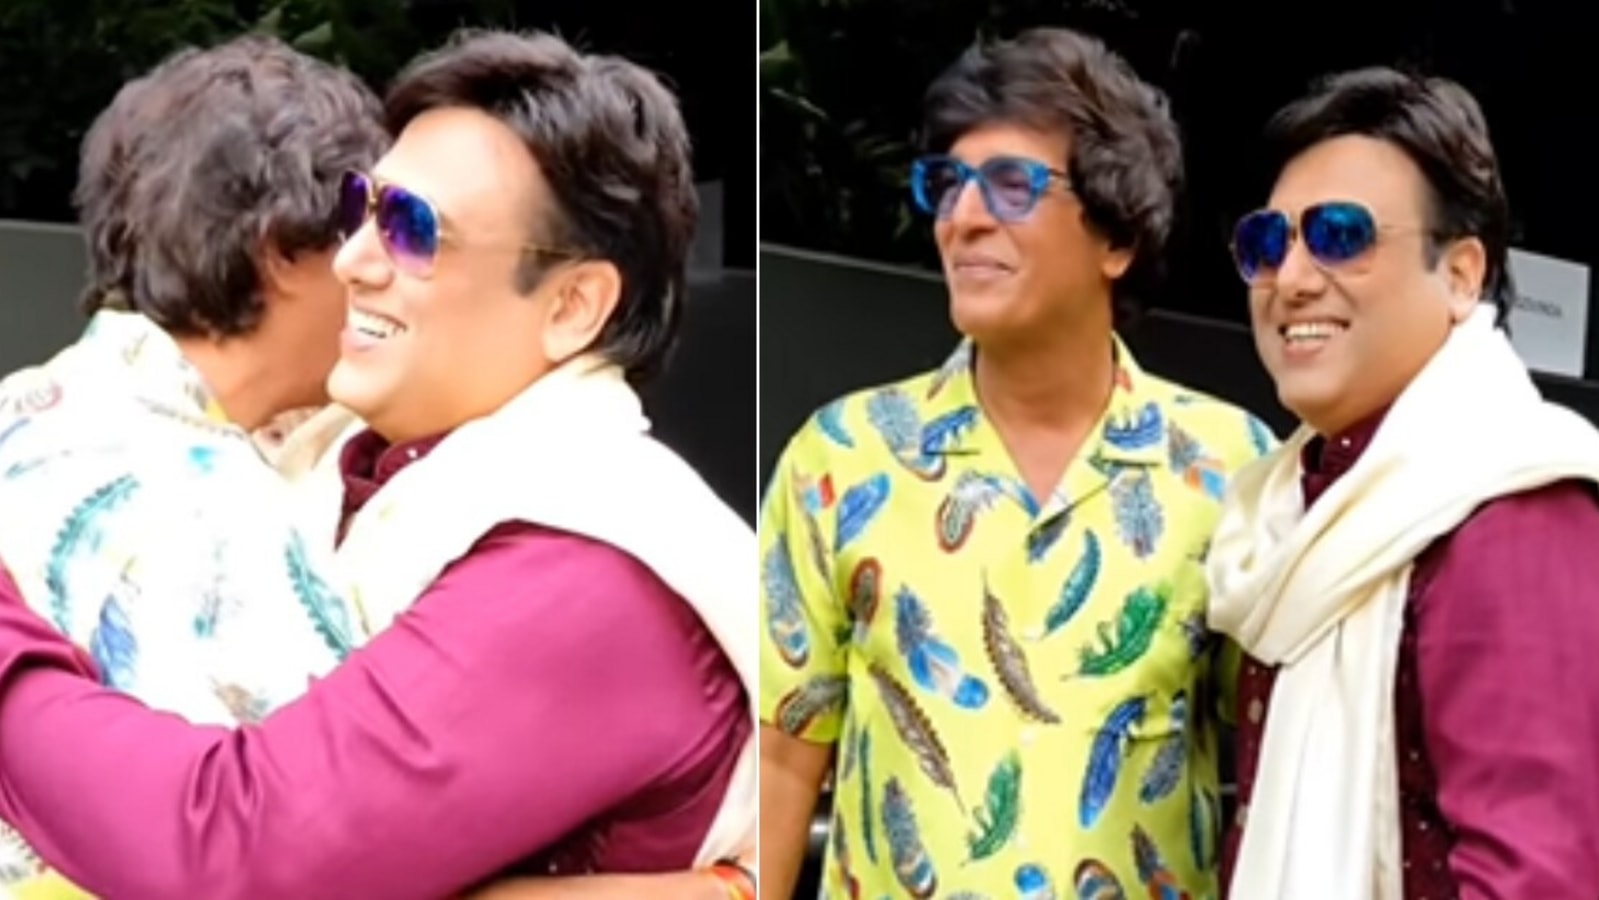 Govinda, Chunky Pandey run into each other in Mumbai, share a hug. Fans ask if Aankhen 2 is on cards. Watch